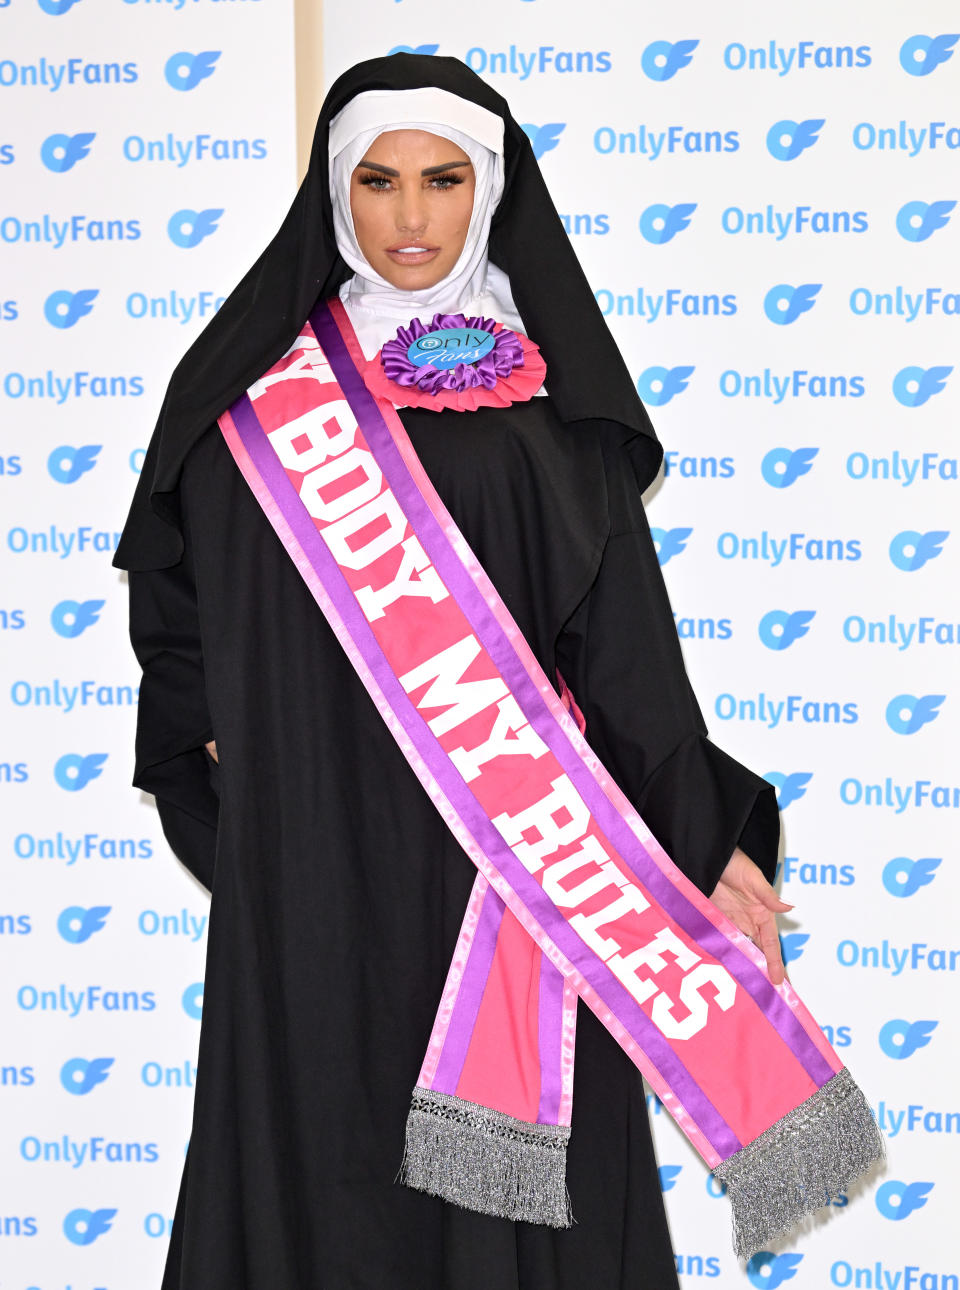 LONDON, ENGLAND - JANUARY 26: Katie Price launches her new OnlyFans Channel at Holborn Studios on January 26, 2022 in London, England. (Photo by Karwai Tang/WireImage)